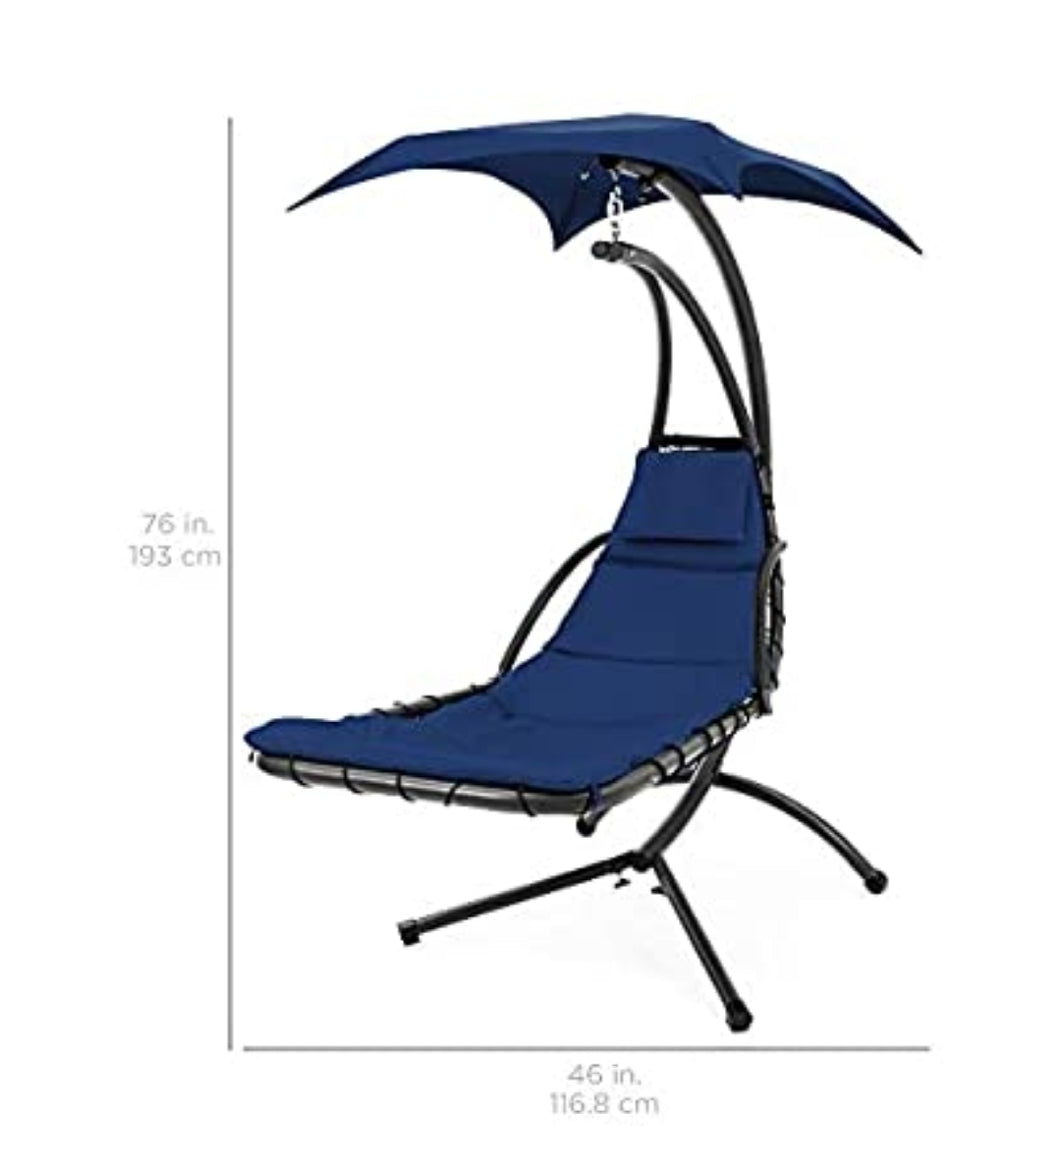 Outdoor Hanging Curved Steel Chaise Lounge Chair Swing